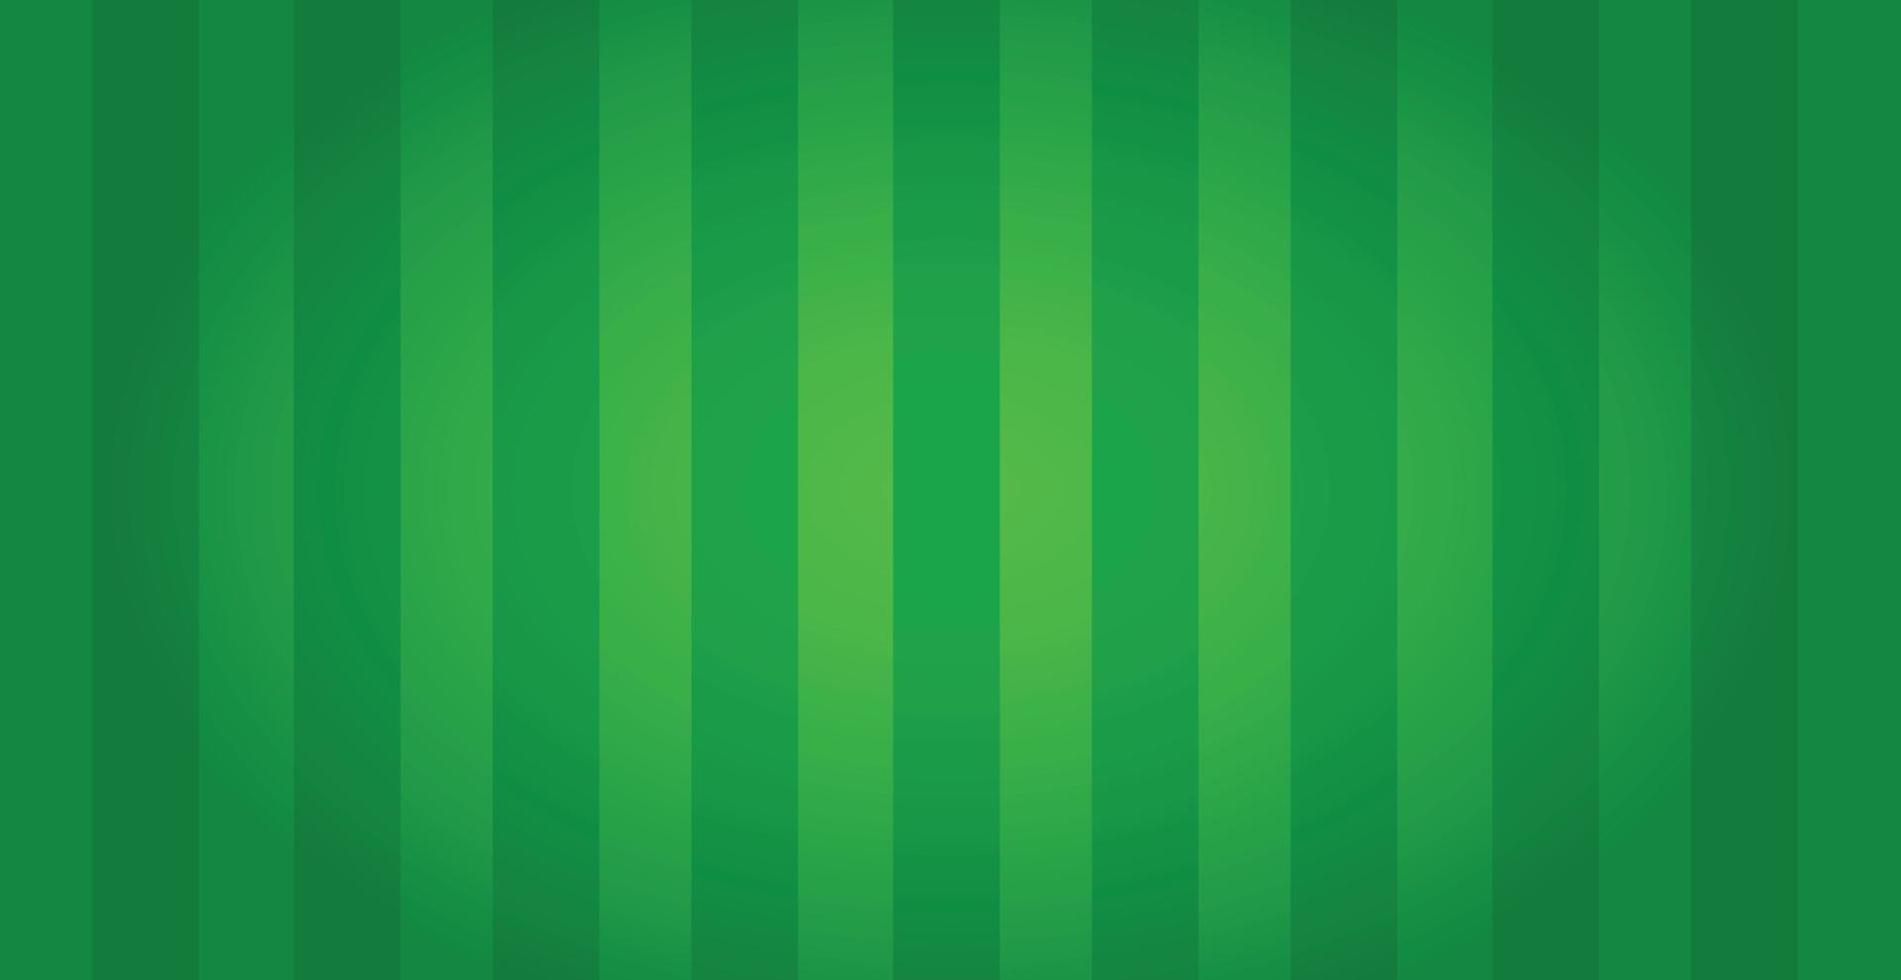 Realistic green soccer field with vertical lines - Vector